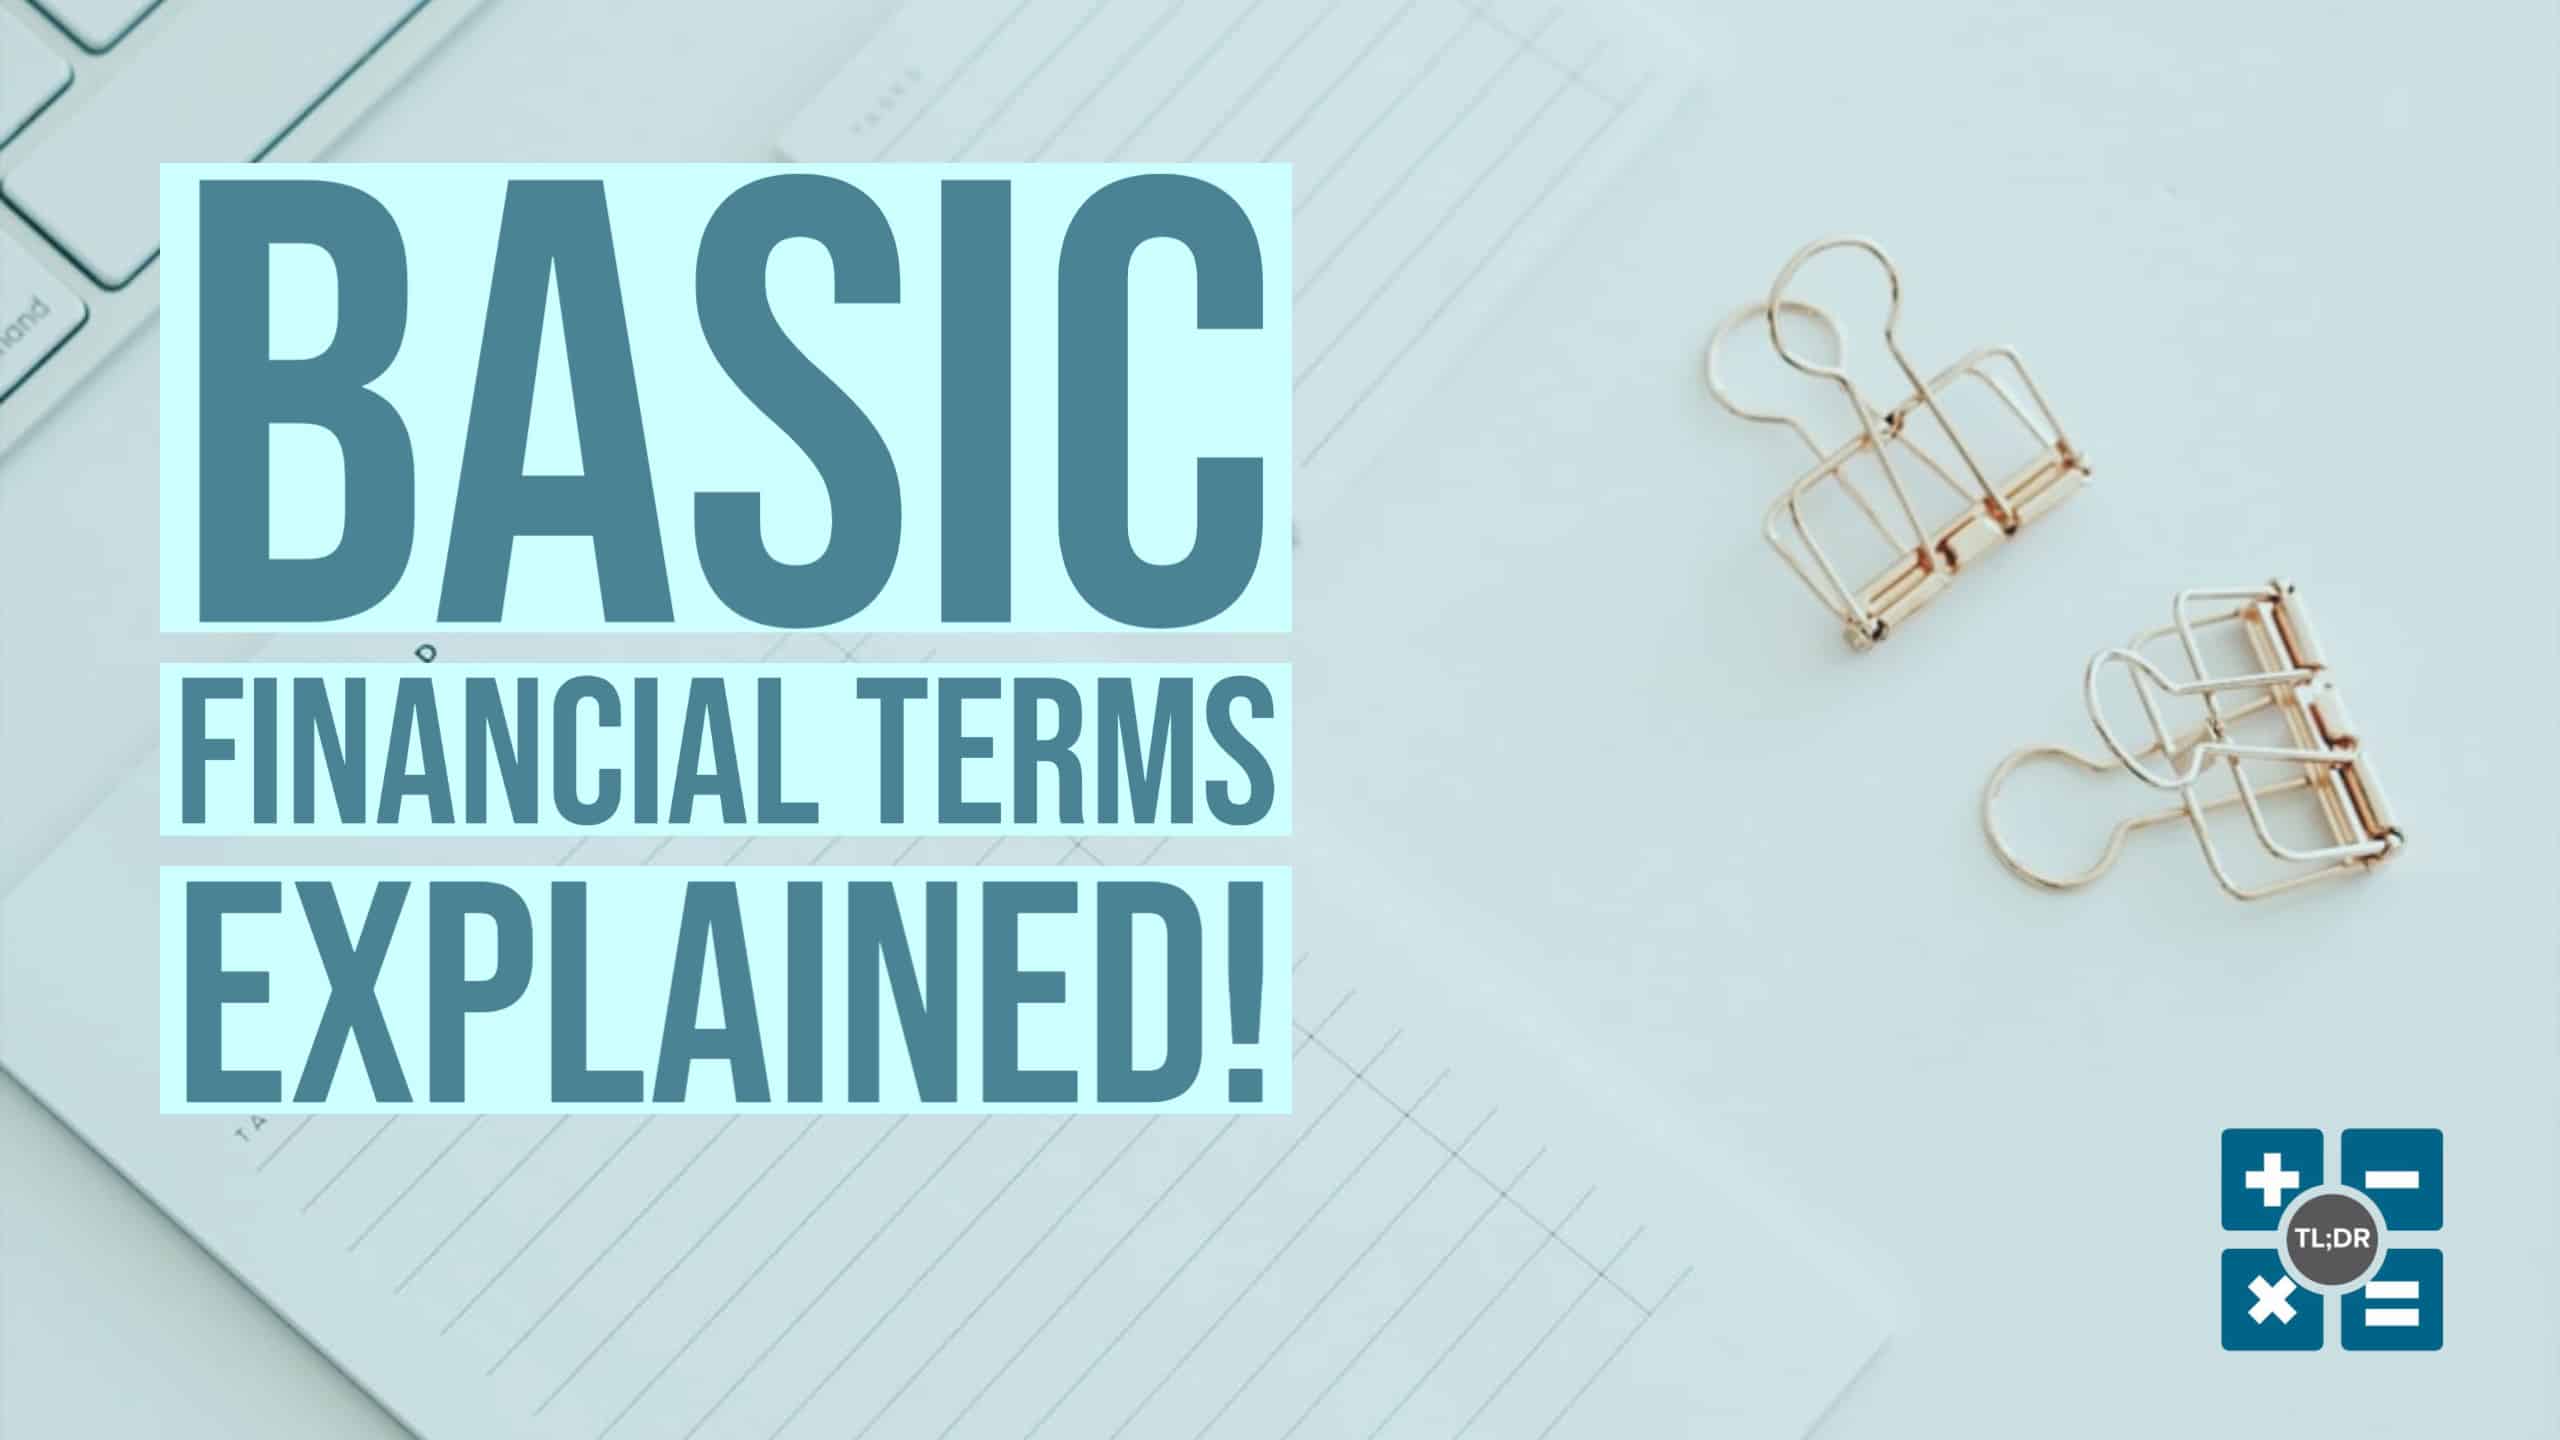 Basic financial terms explained